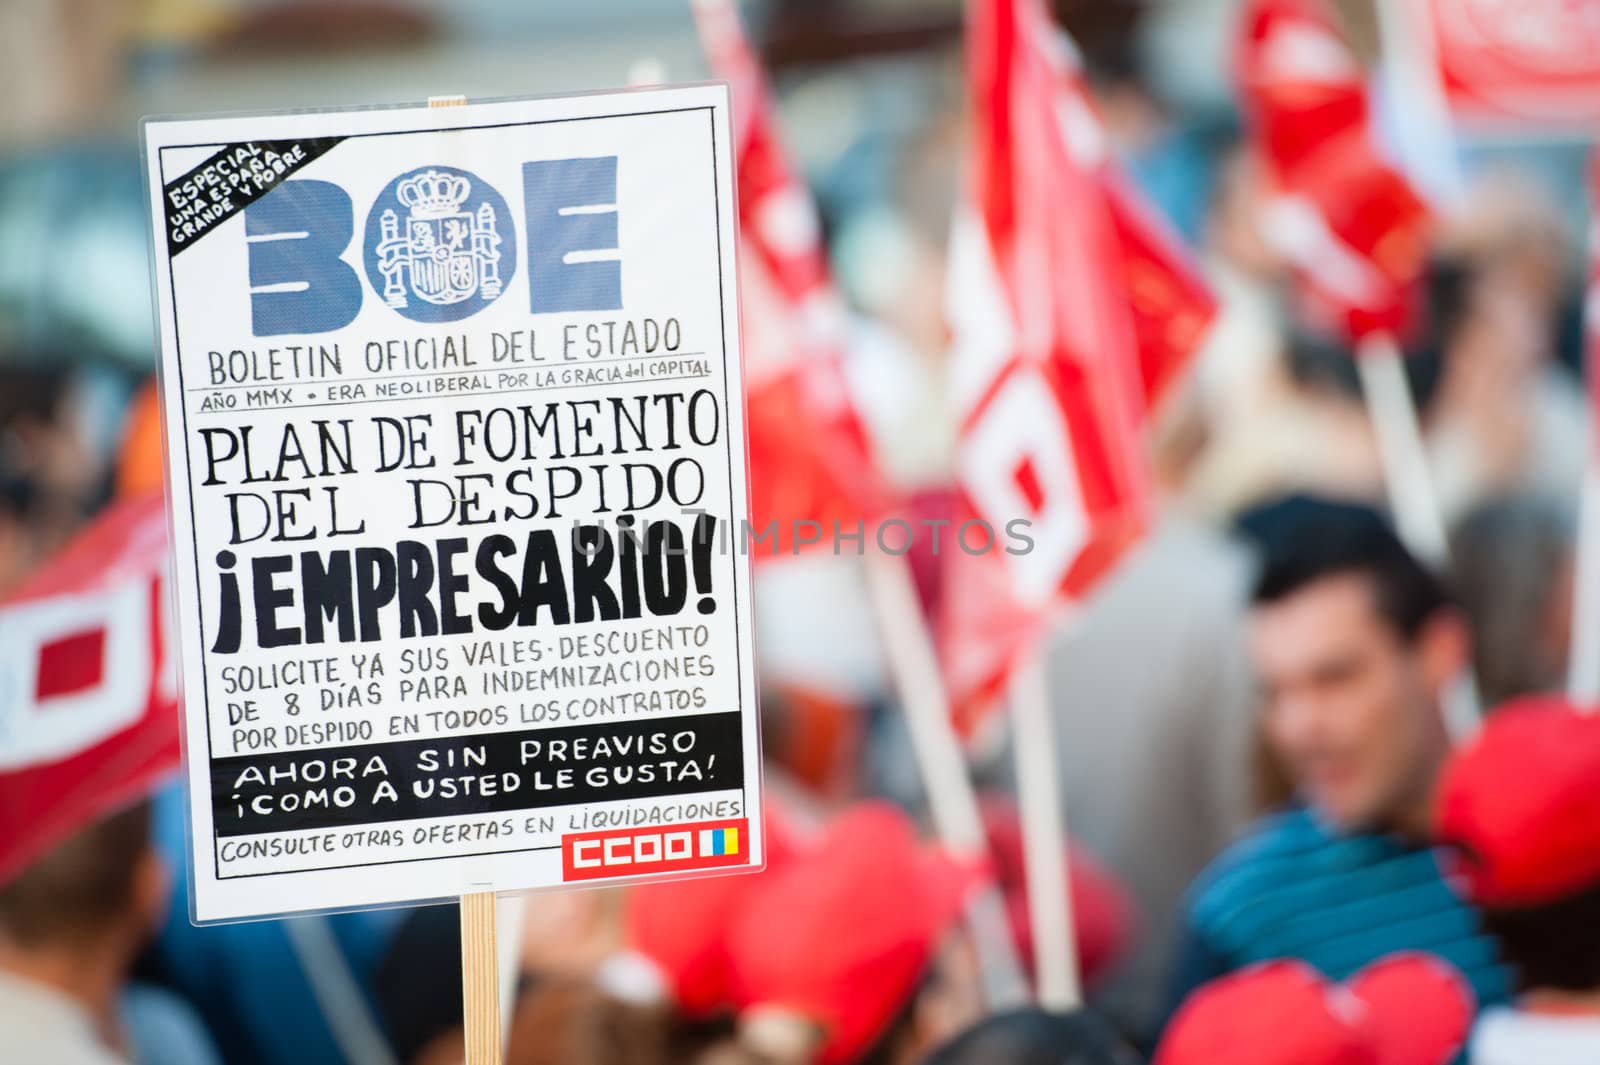 LAS PALMAS, SPAIN–MARCH 29: Banner with message against new labor reforms and austerity cuts, during the Spanish general strike 29-M on March 29, 2012 in Las Palmas, Spain
